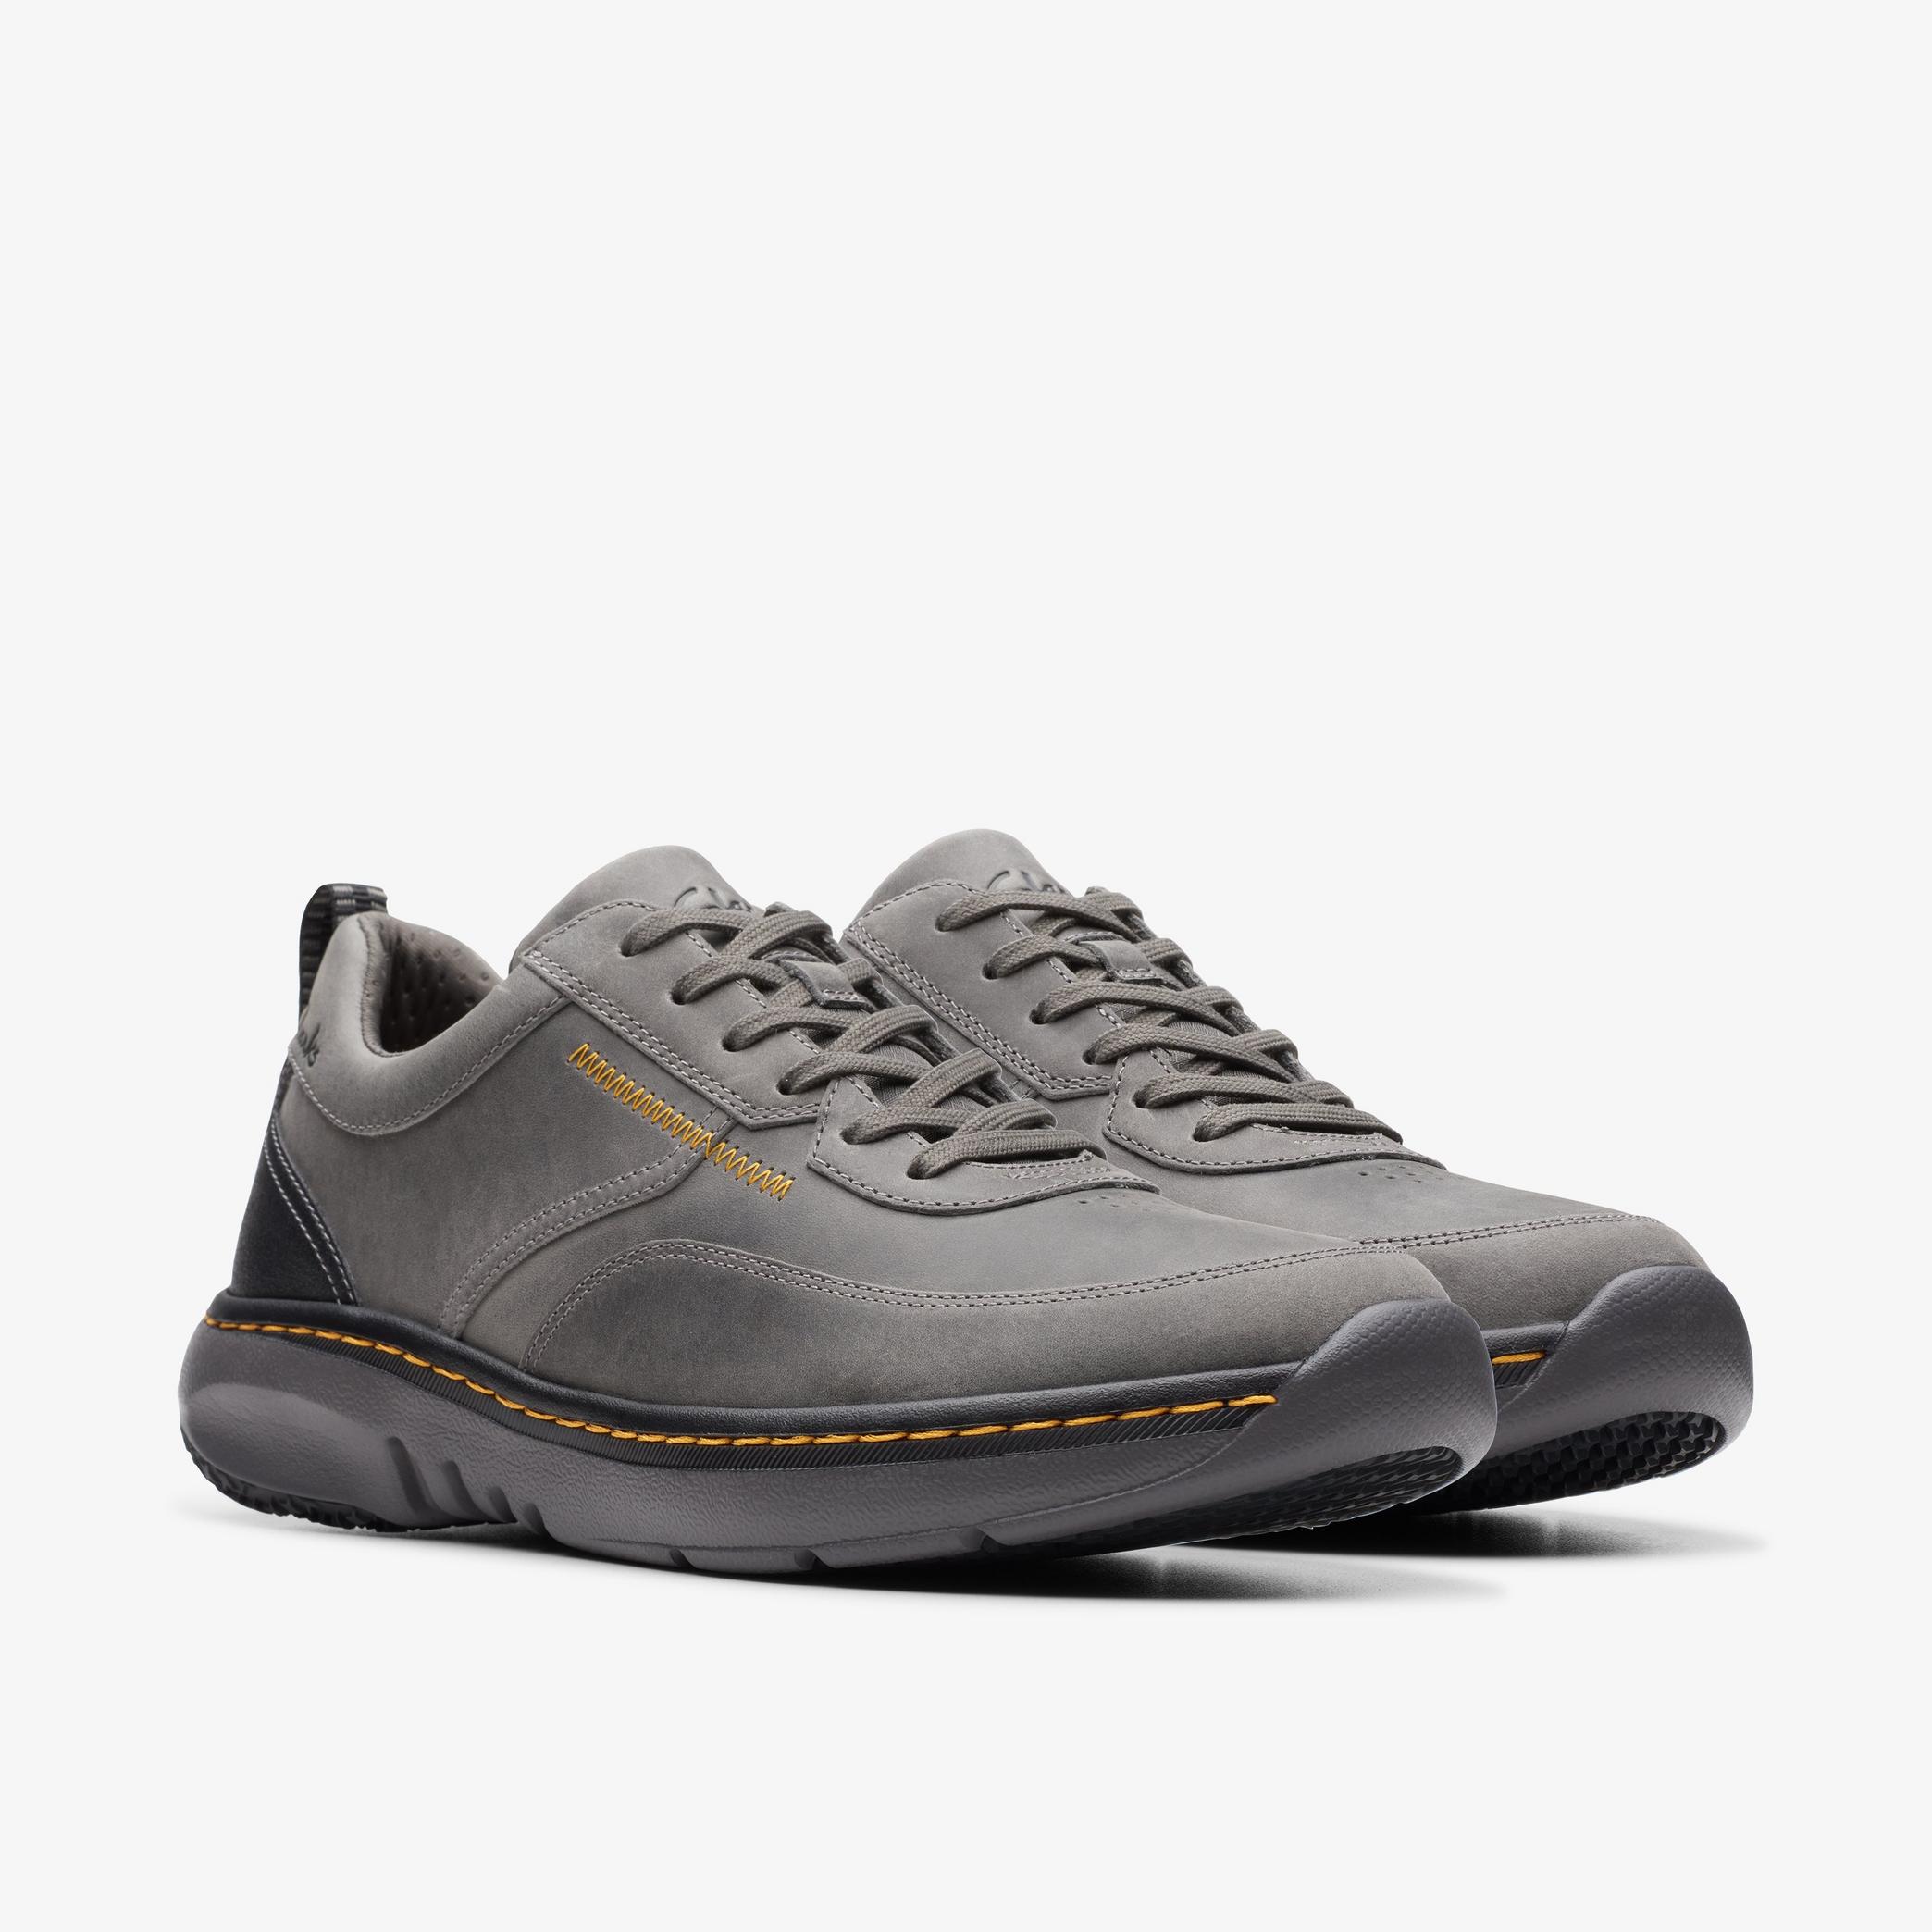 Clarks Pro Lace Dark Grey Leather Trainers, view 4 of 6